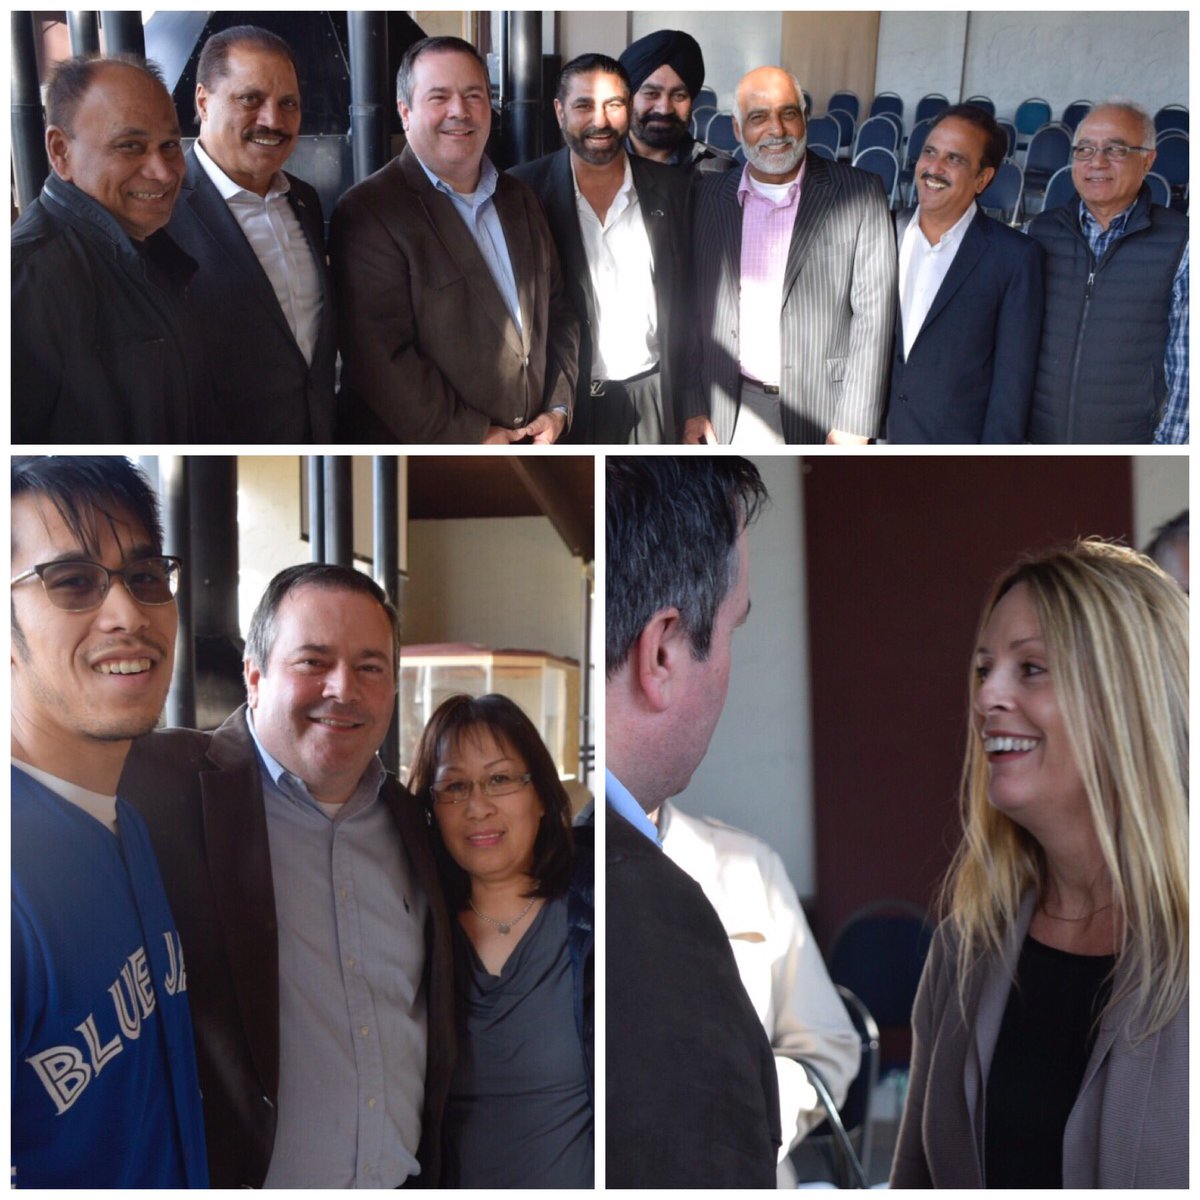 Another full house yesterday in Chestermere. Thanks to all who attended, including @deepakobhrai.